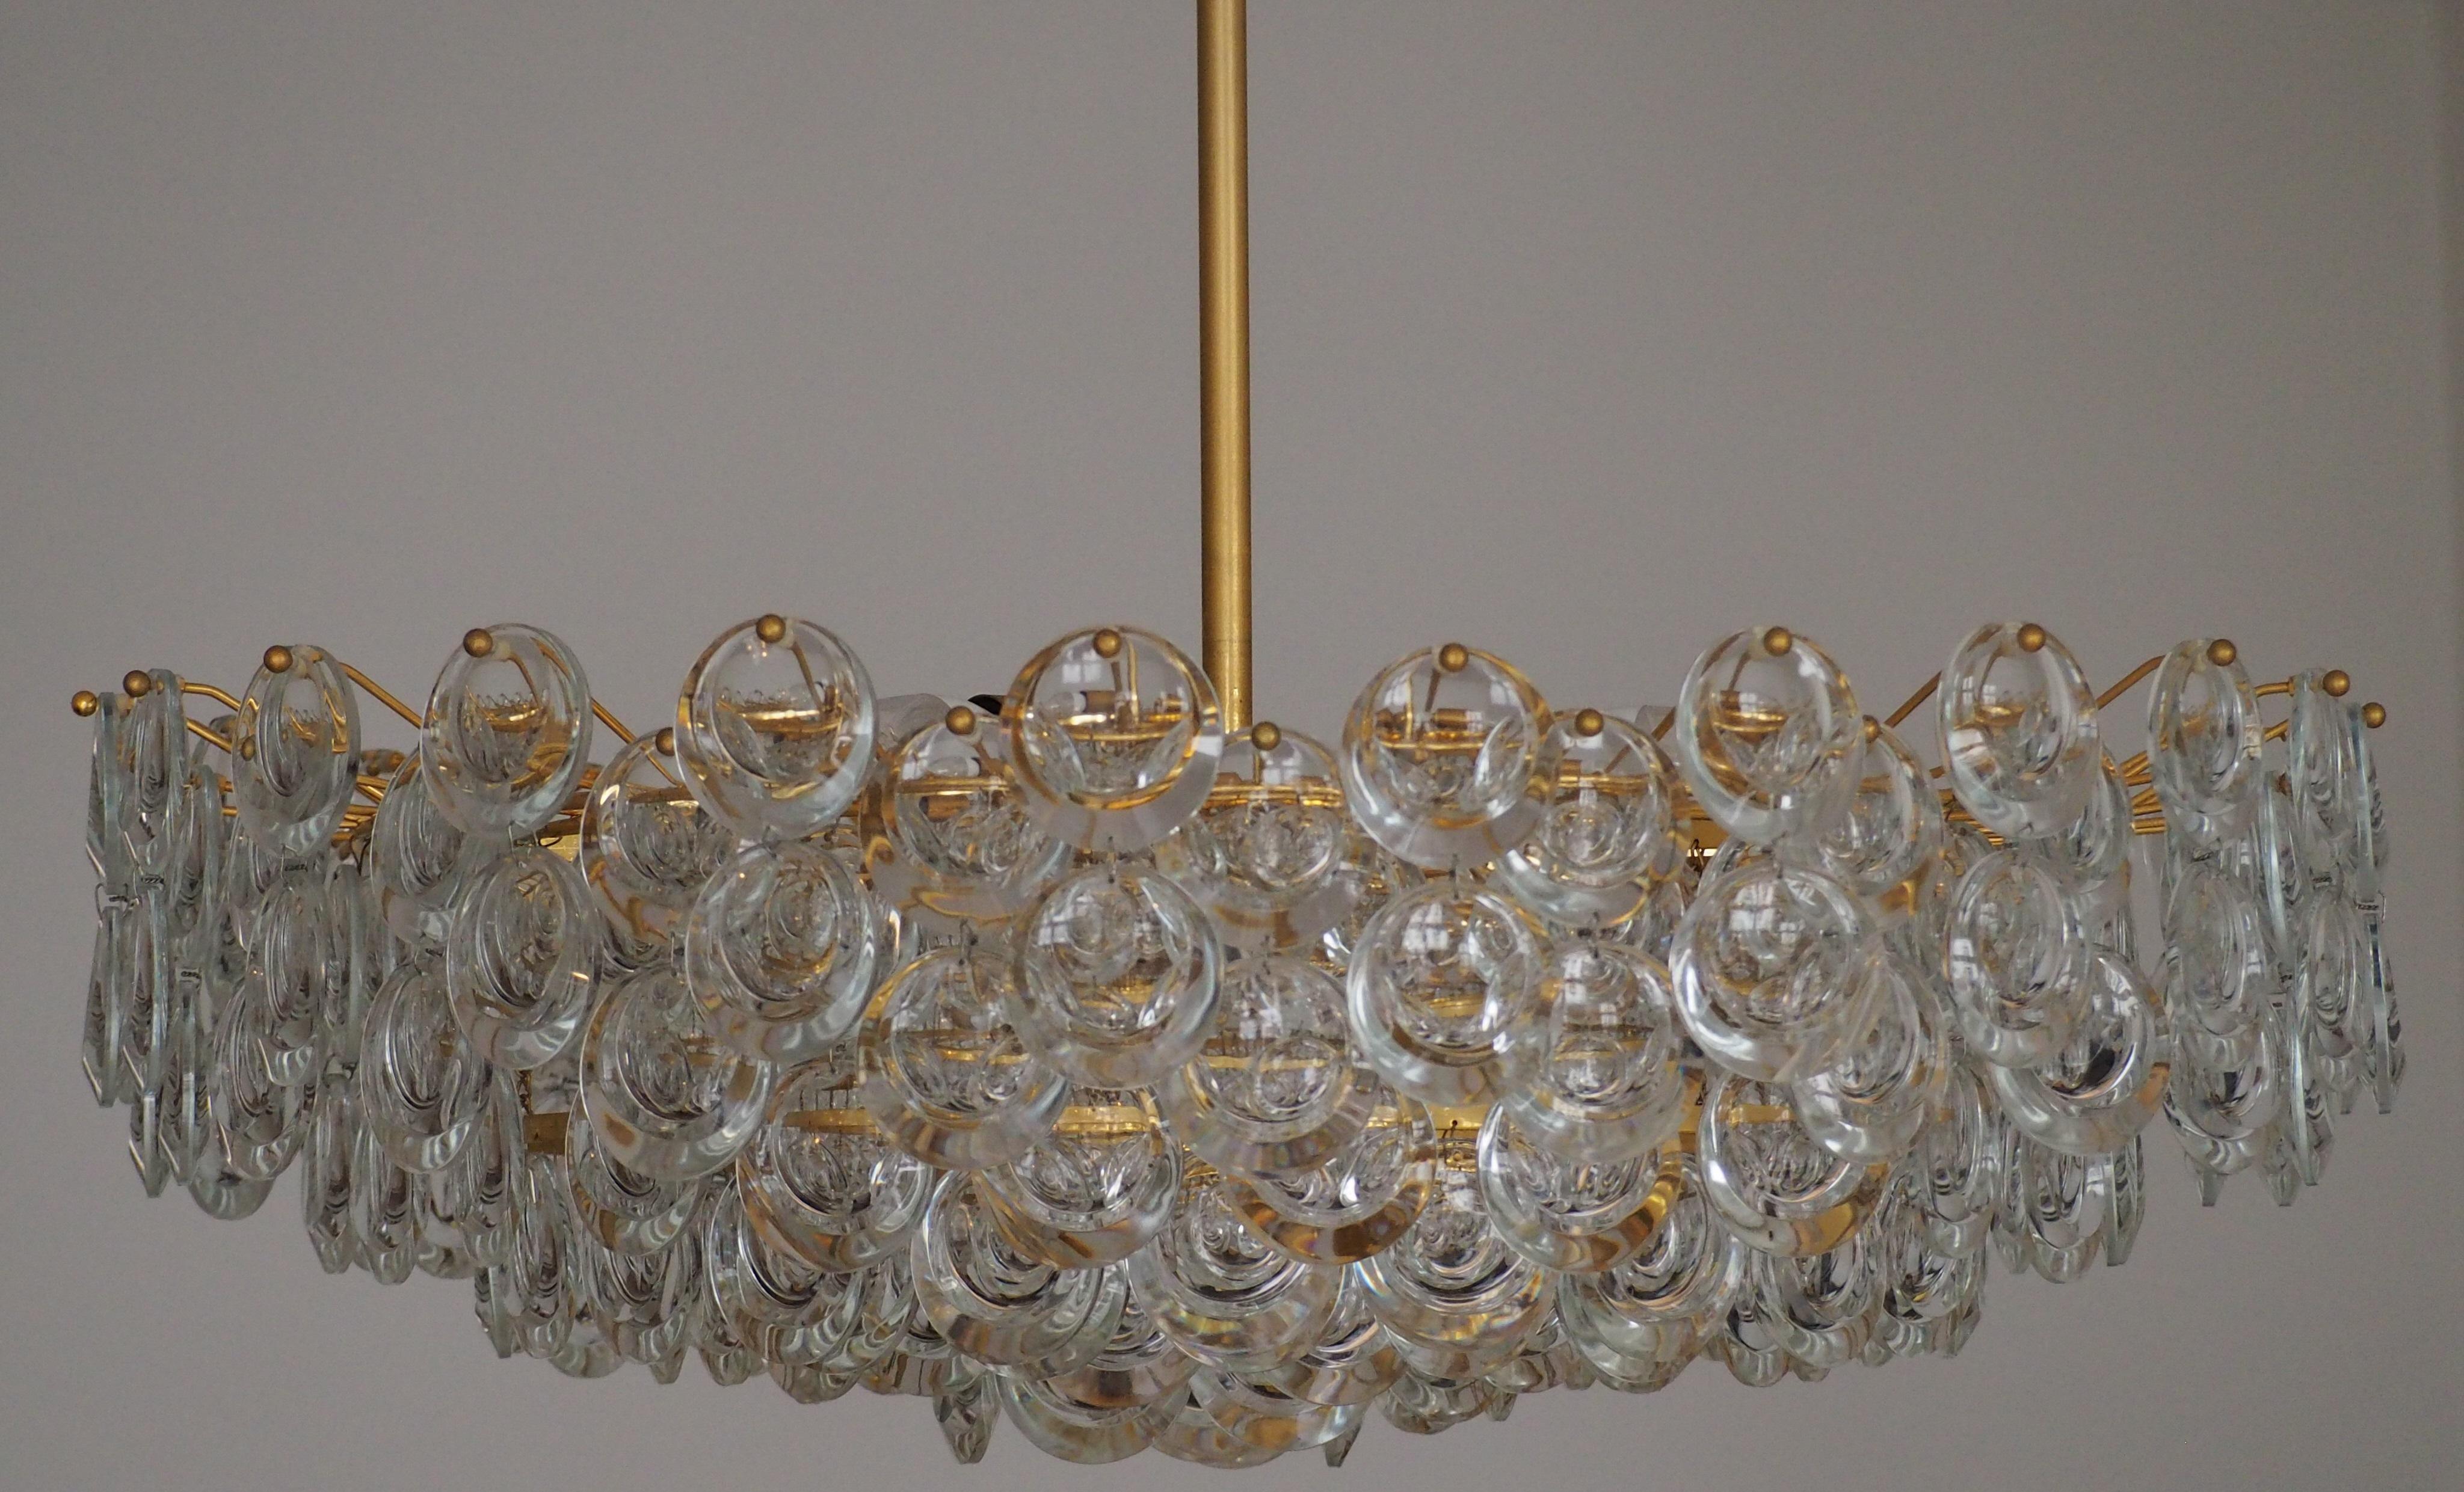 Gilt Pair of Huge Gold-Plated and Cut Glass Chandeliers by Palwa, circa 1960s